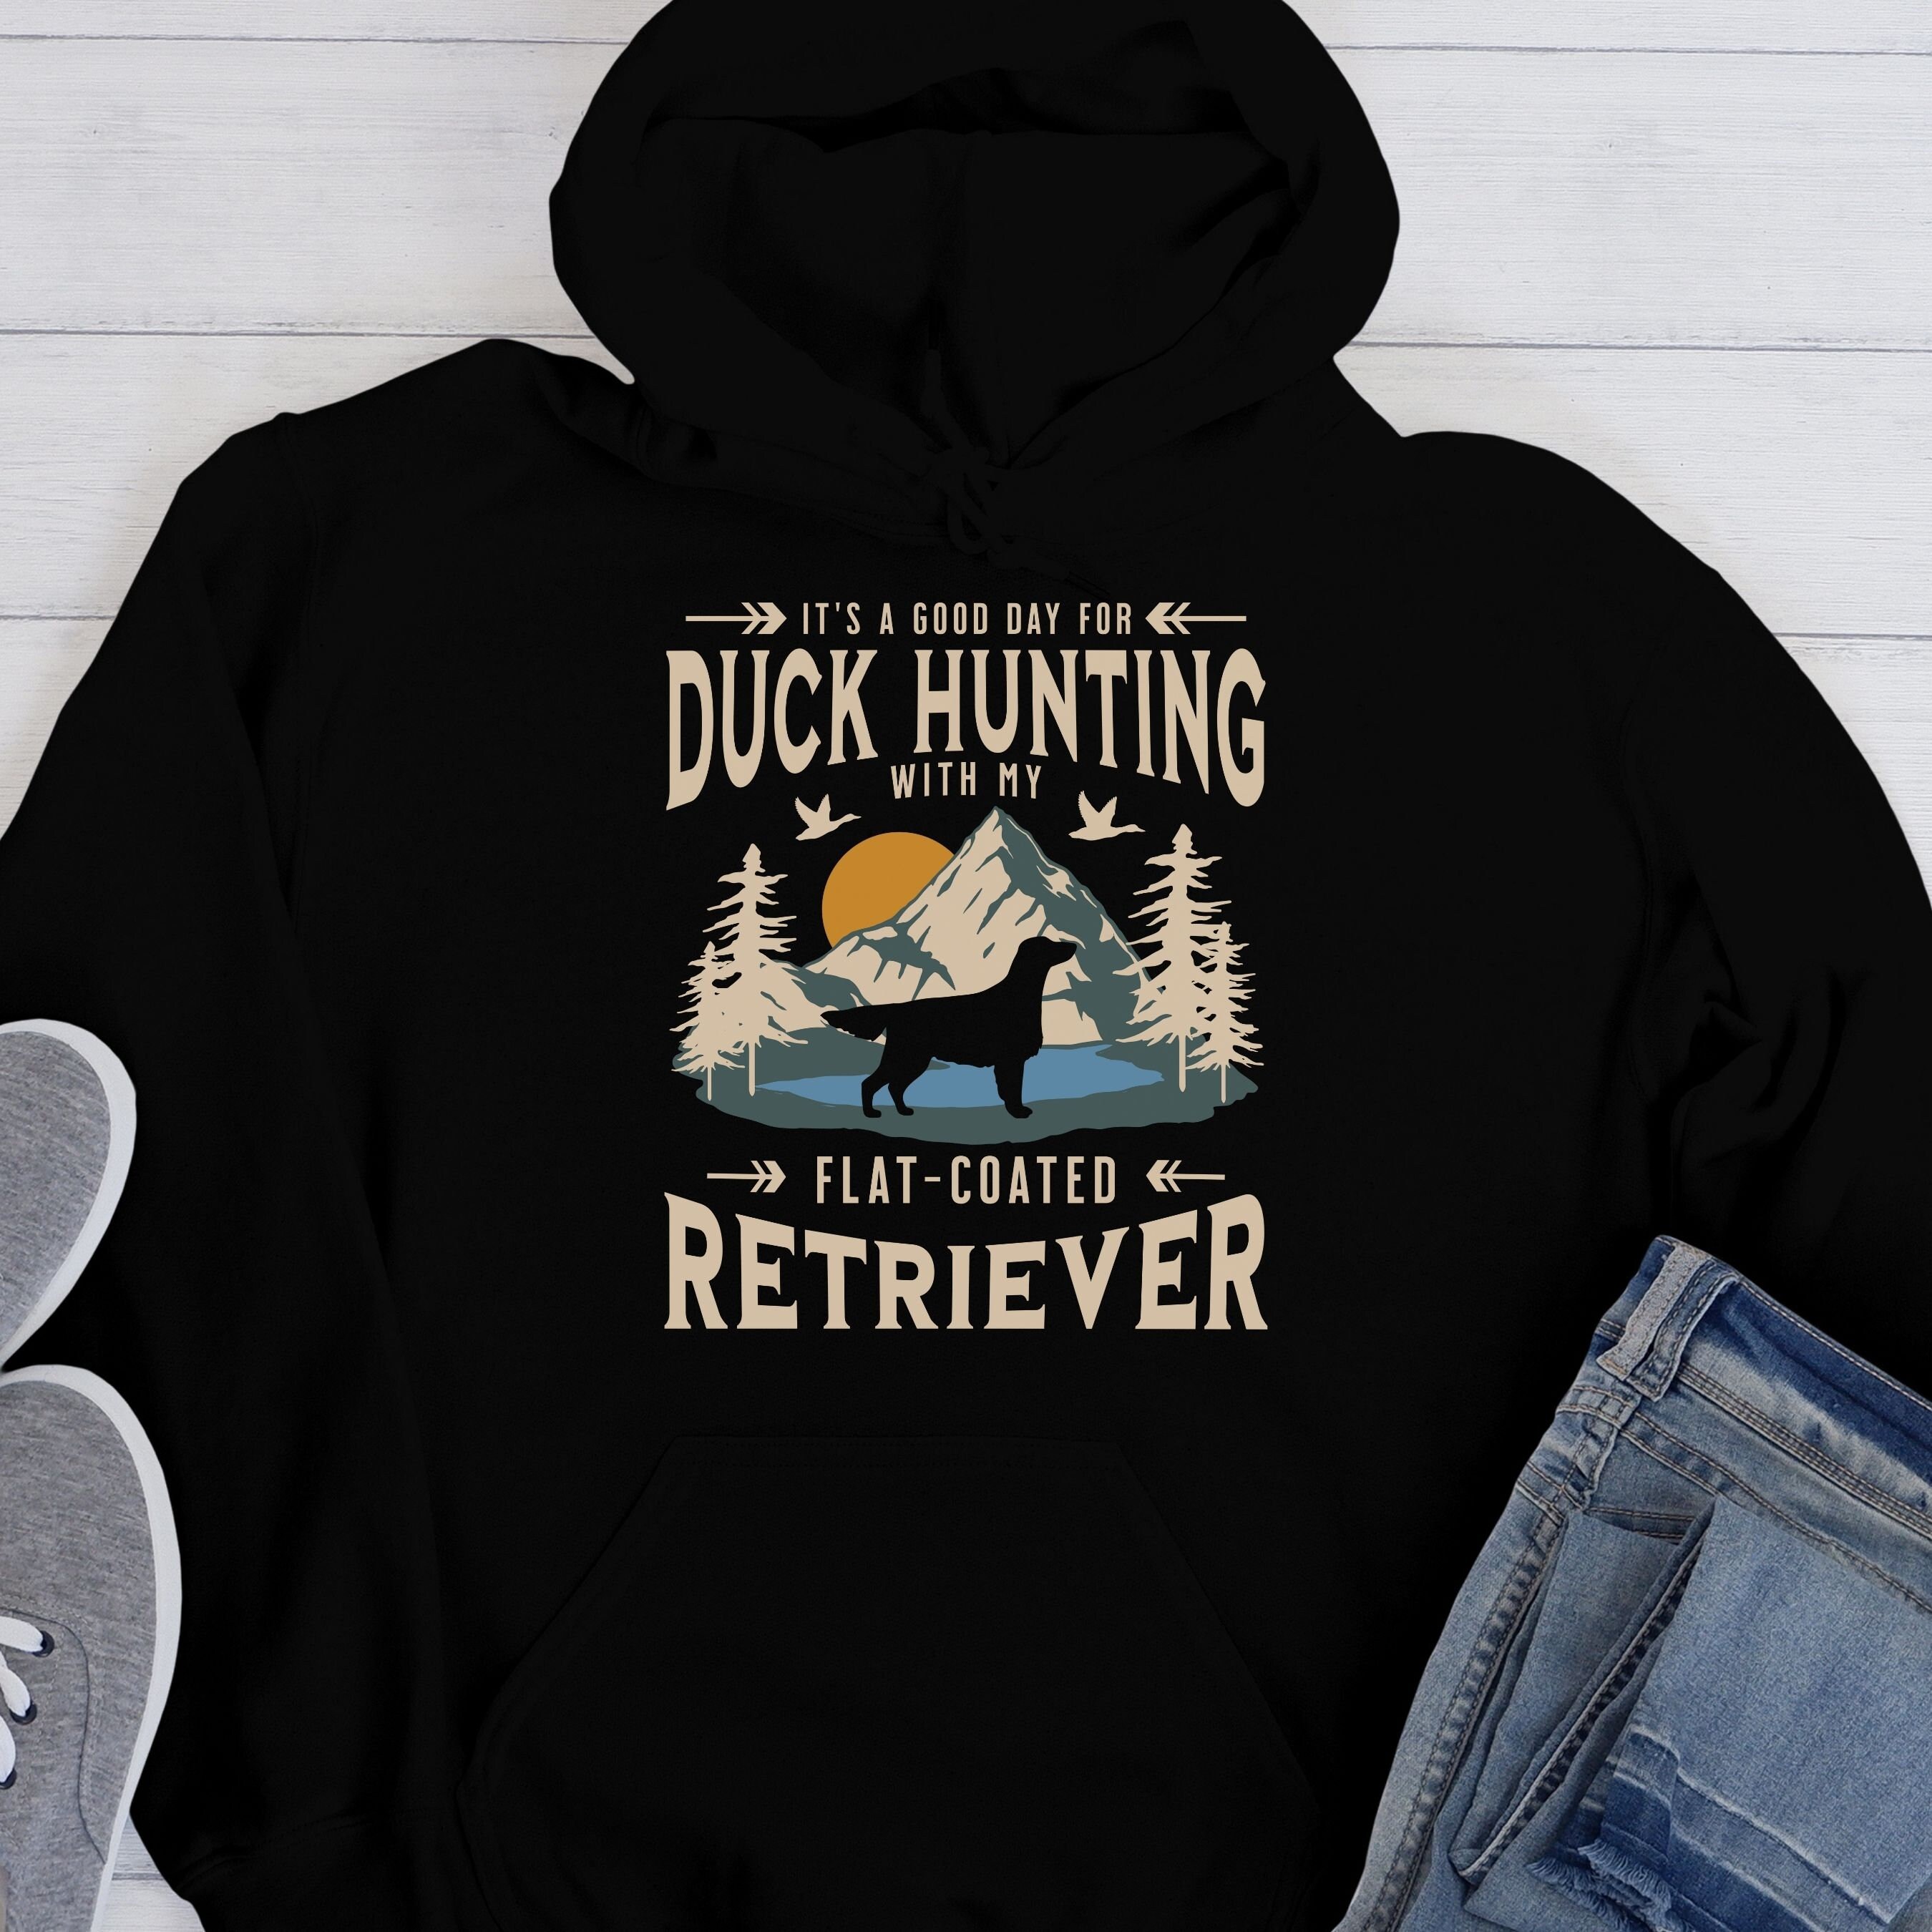 New 2020 Hunting Duck Funny Print 3D Sweatshirt Fishing Hoodie For Men And  Women AA01 From Rong8899, $20.92